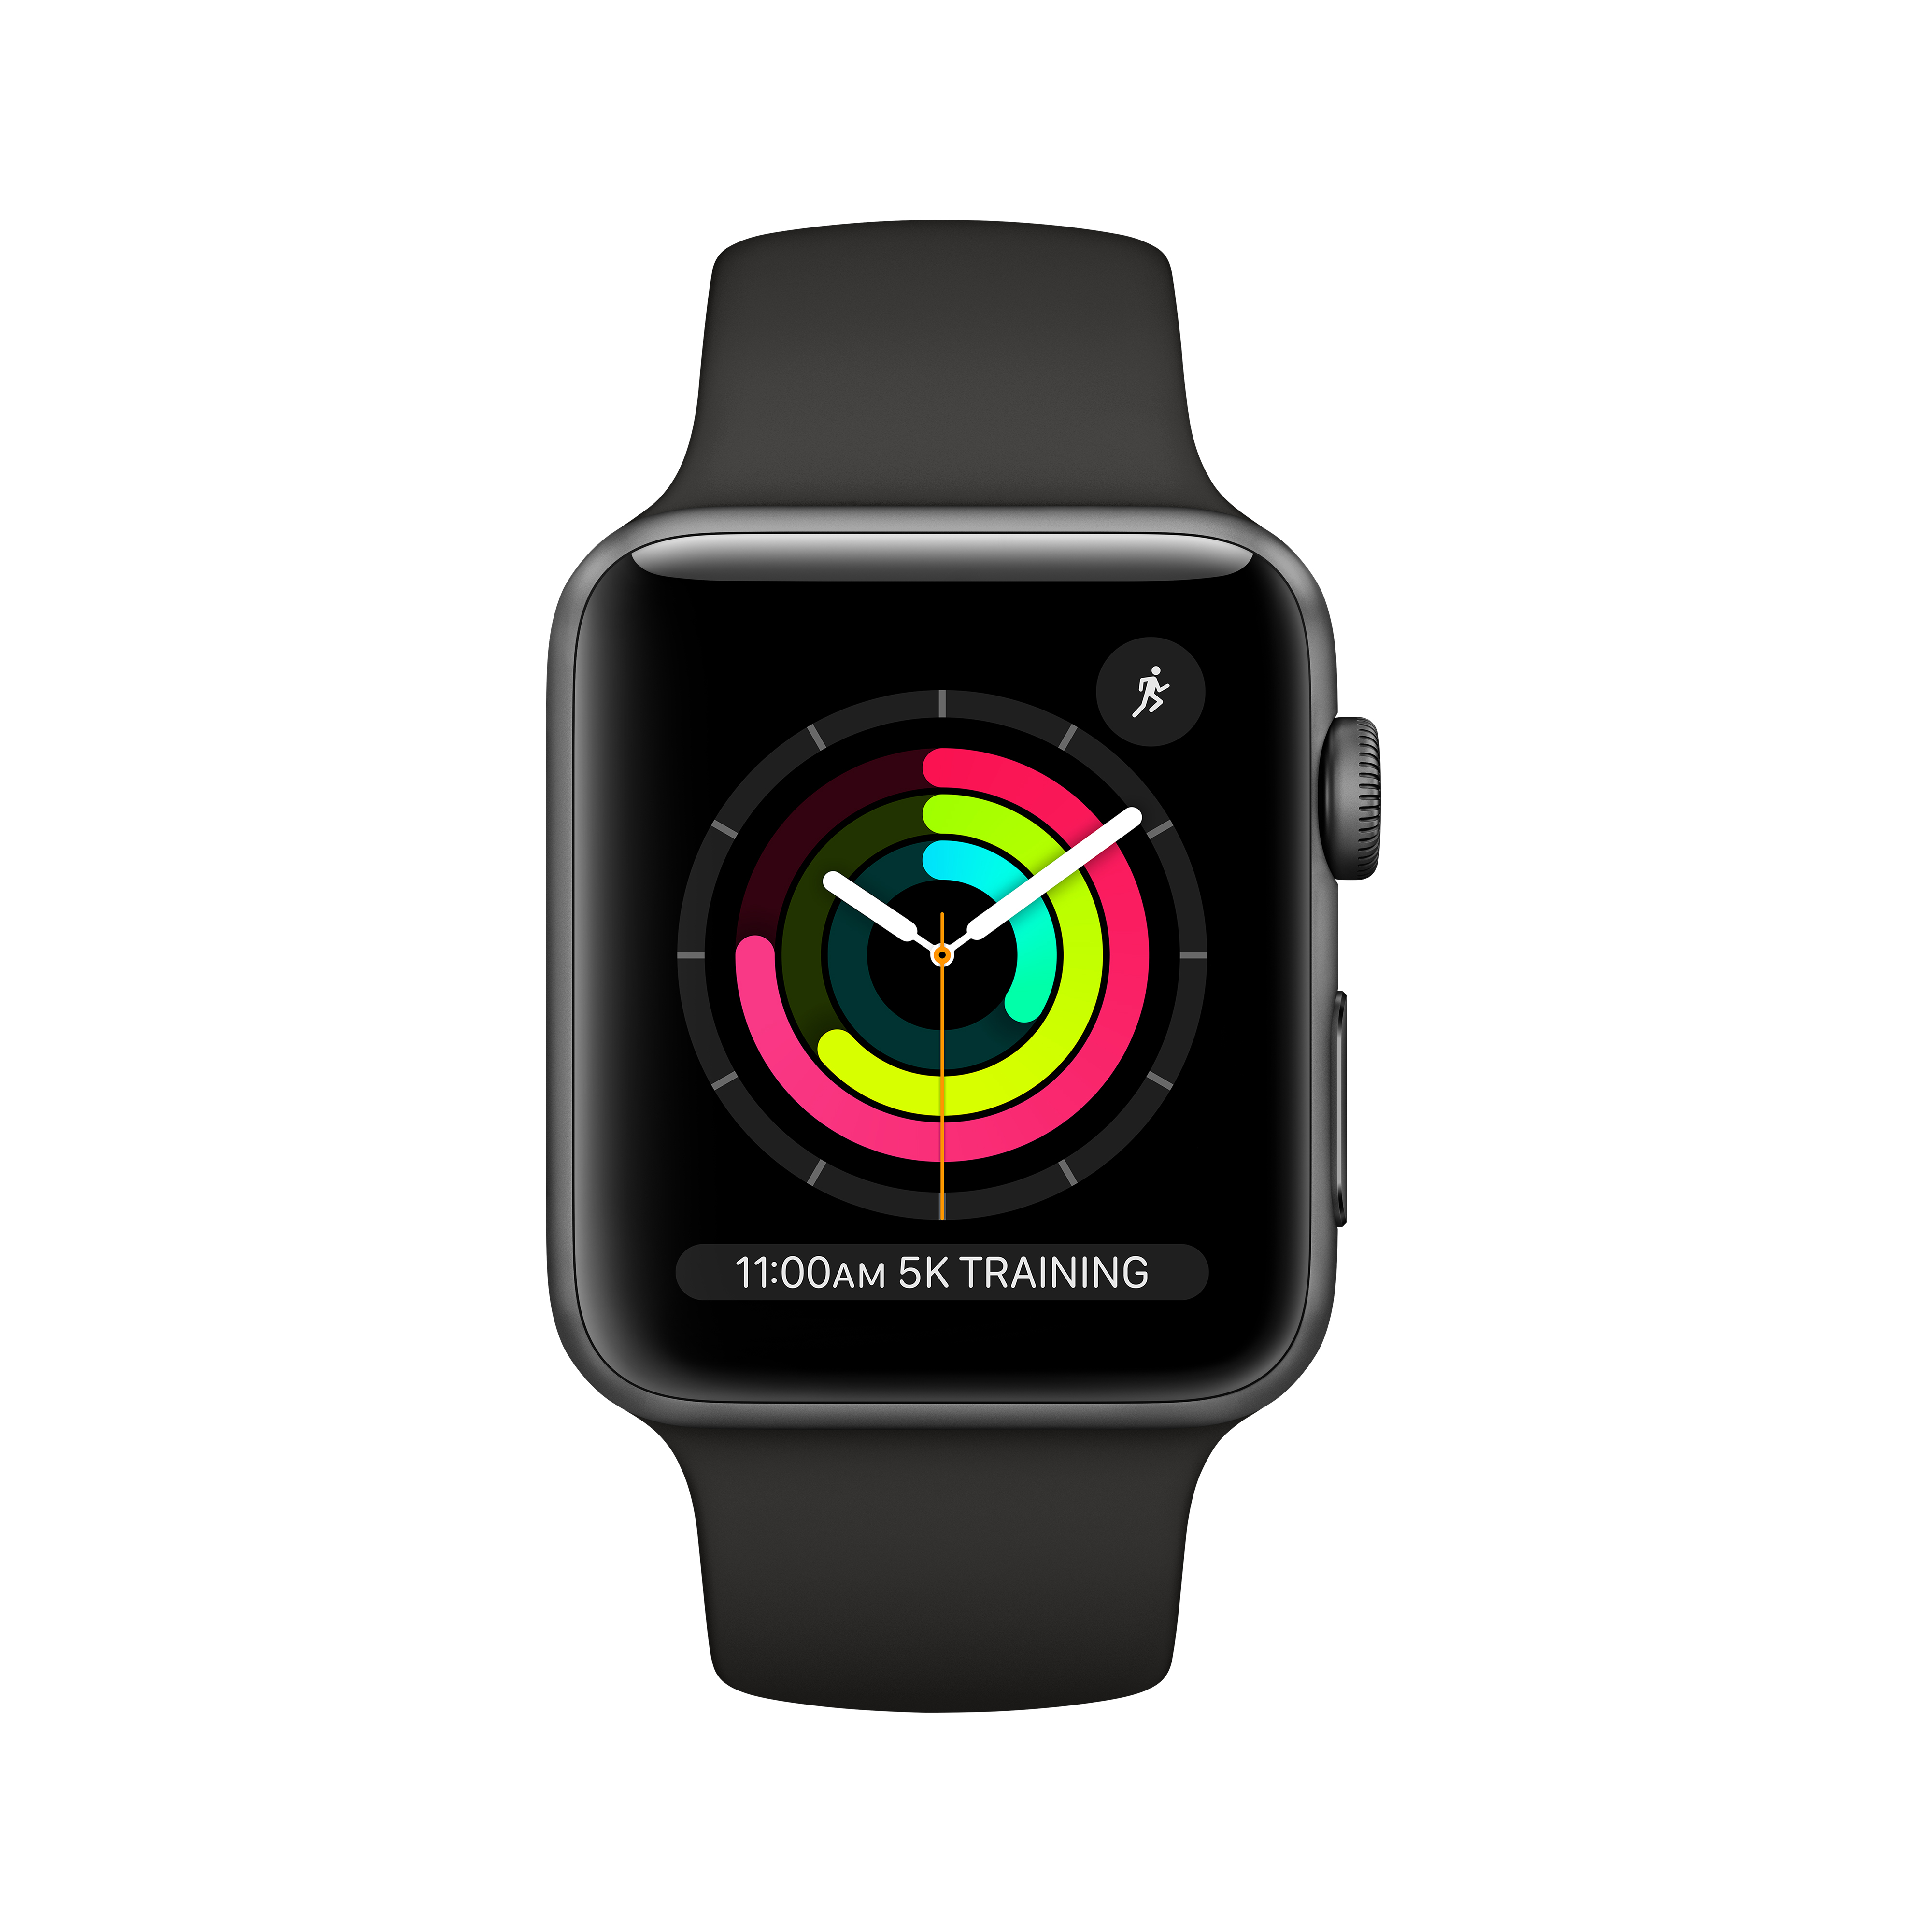 Apple Watch Series 3 GPS Space Gray - 42mm - Black Sport Band - image 2 of 6